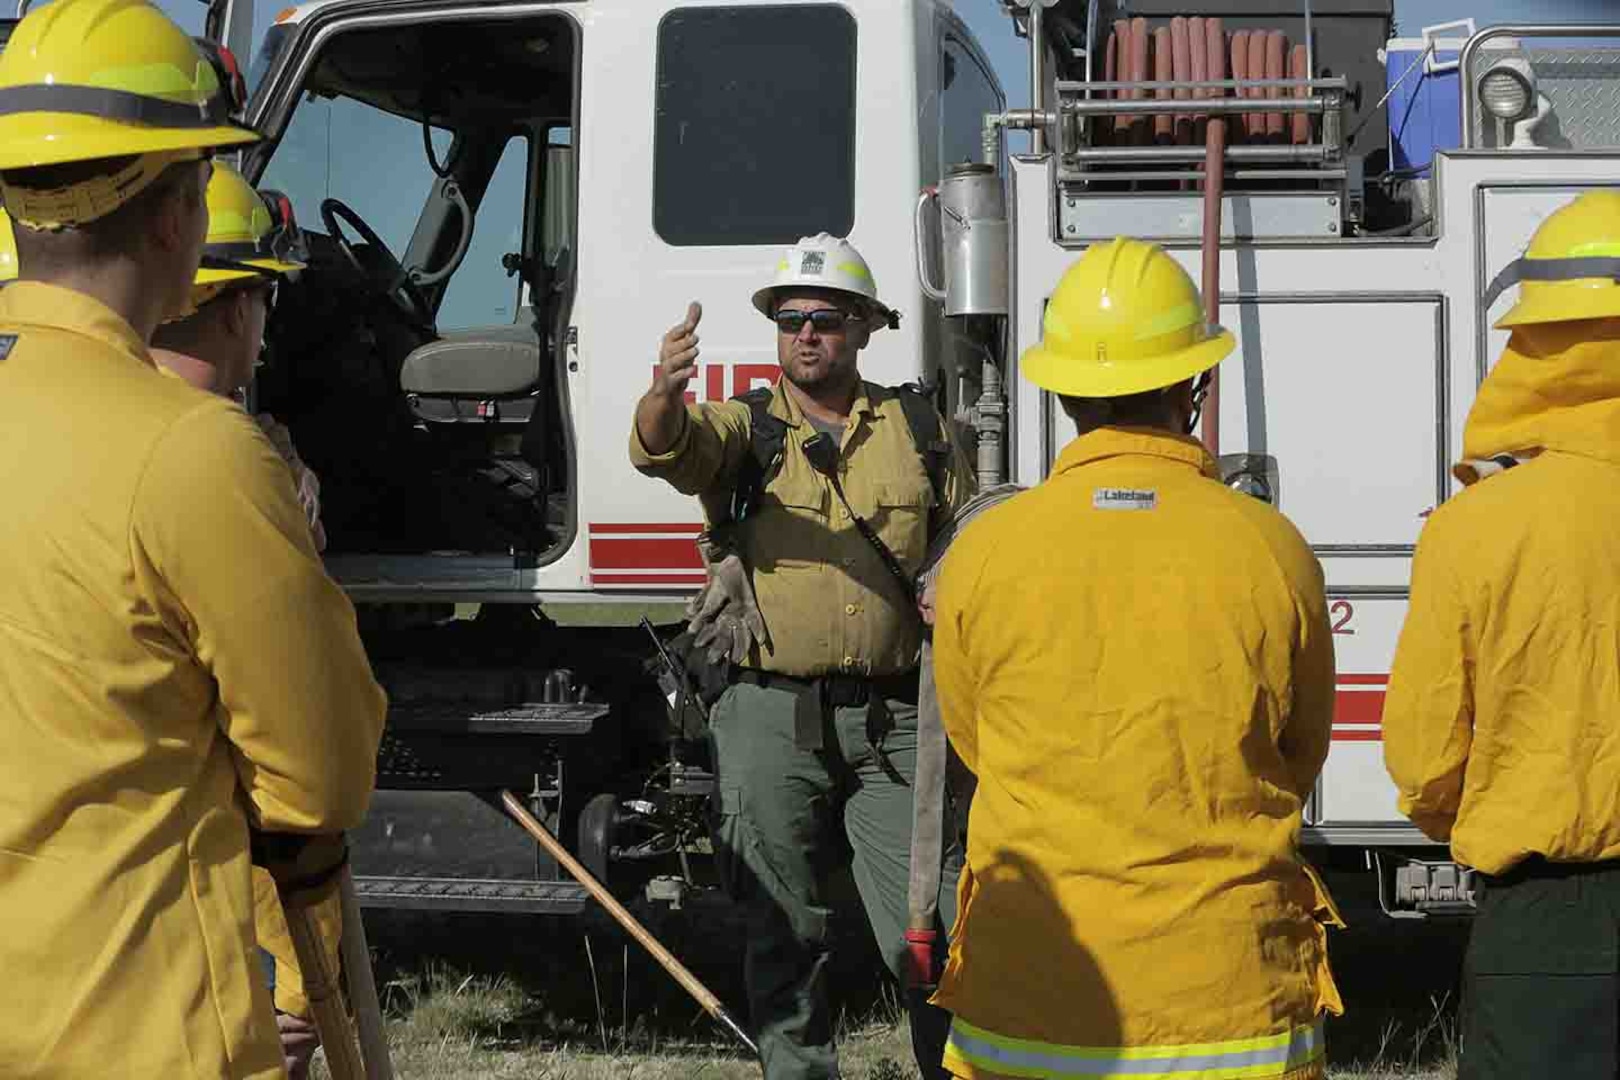 Bryce Haverkamp (center), eastern division fire officer, Kansas Forest Service, explains the operation of a water tender vehicle used by local fire departments. The Kansas Forest Service and fire departments from all over the state served as instructors to Soldiers and Airmen on firefighting capabilities at the Great Plains Joint Training Center in Salina, Kansas, Sep. 16-20, 2019.